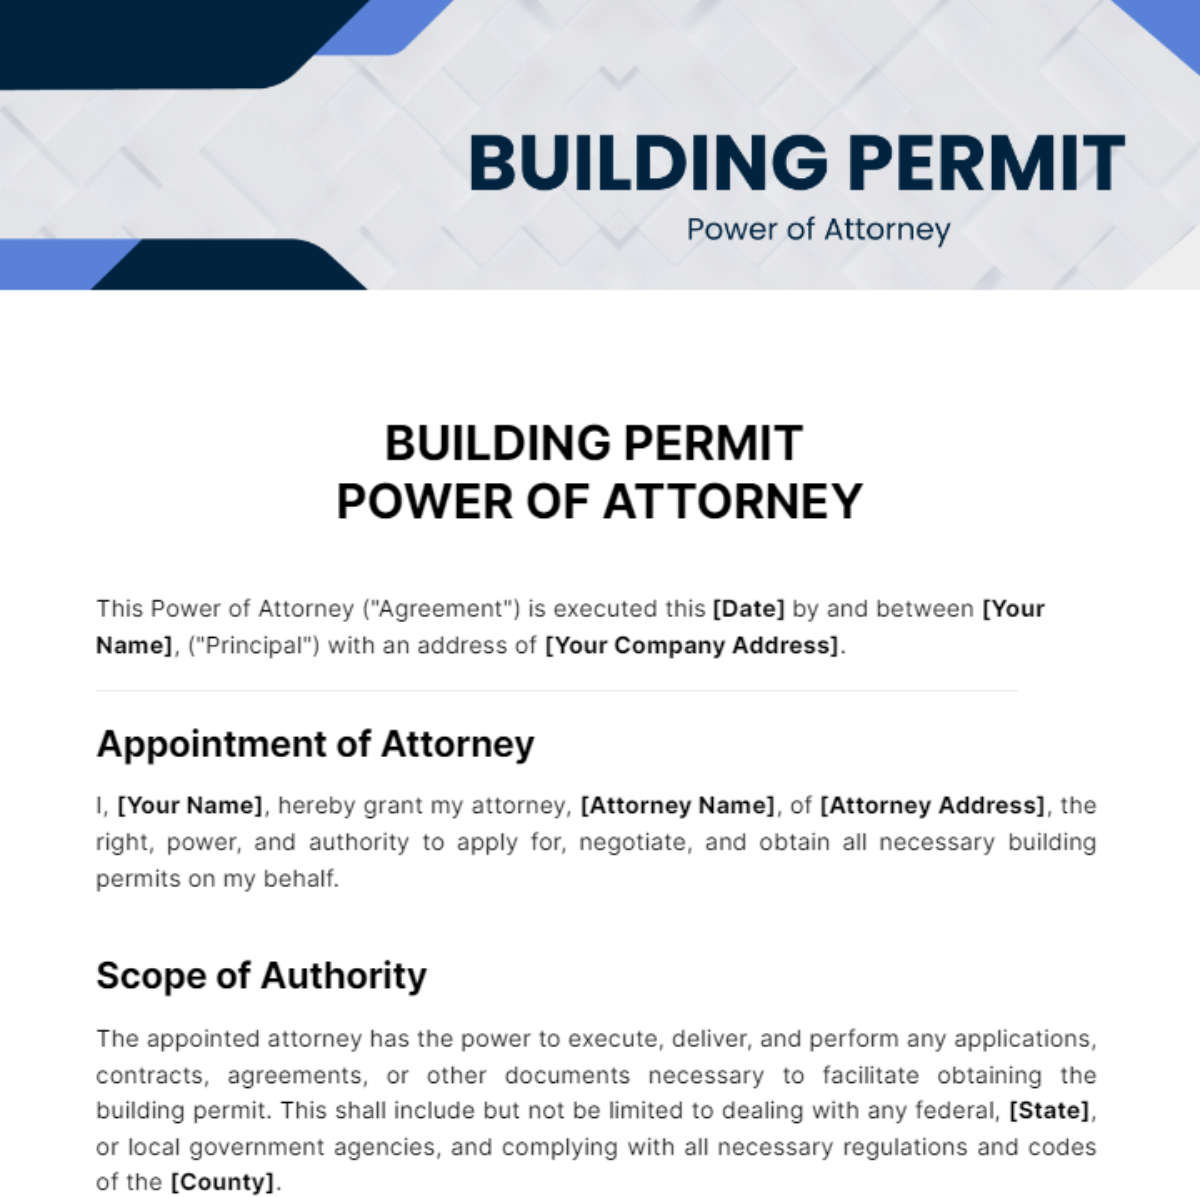 Building Permit Power of Attorney Template